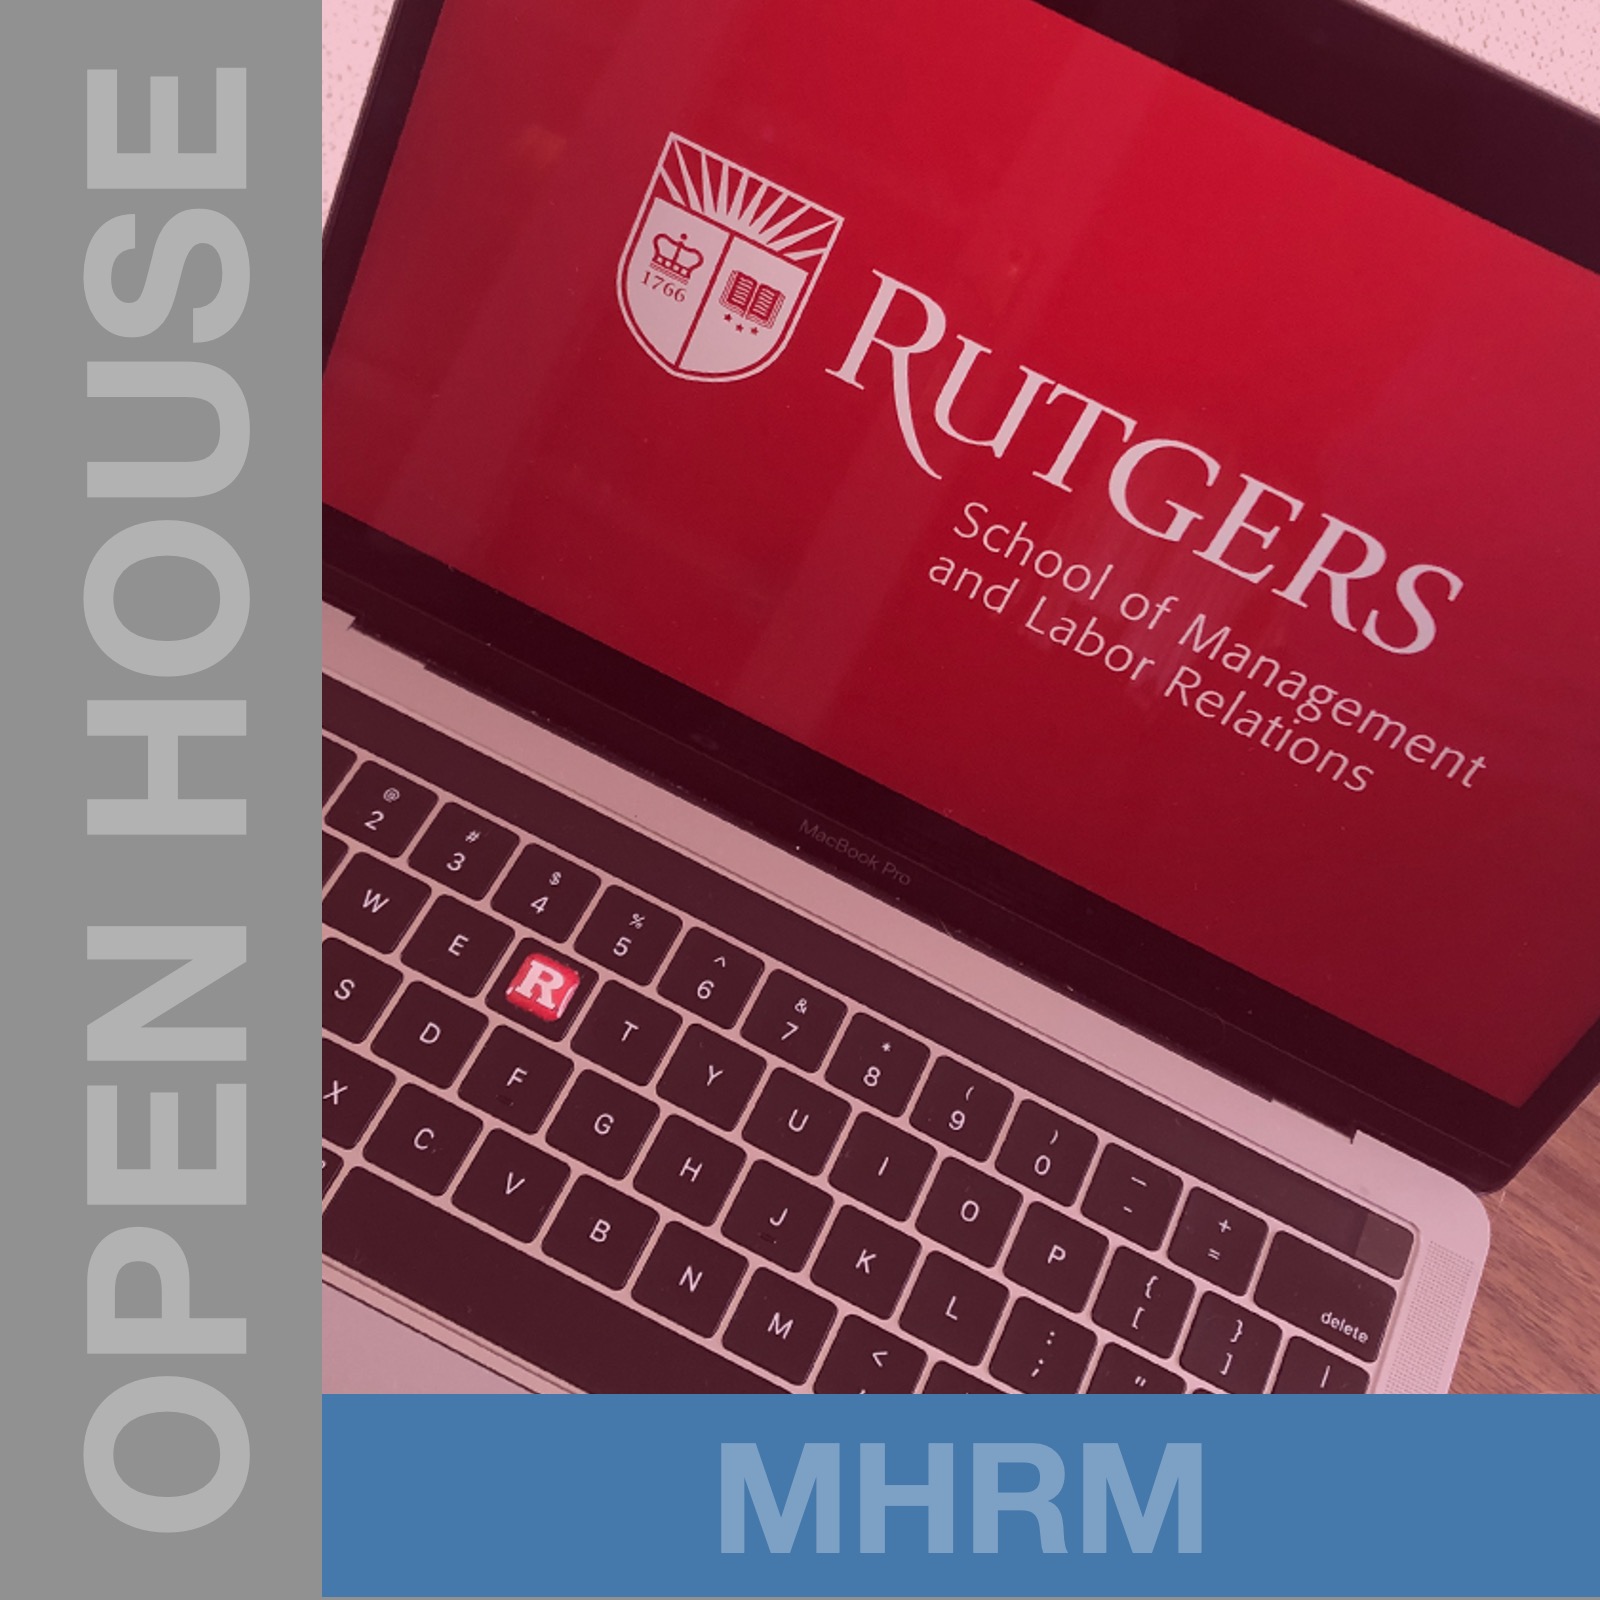 image of computer for MHRM open house